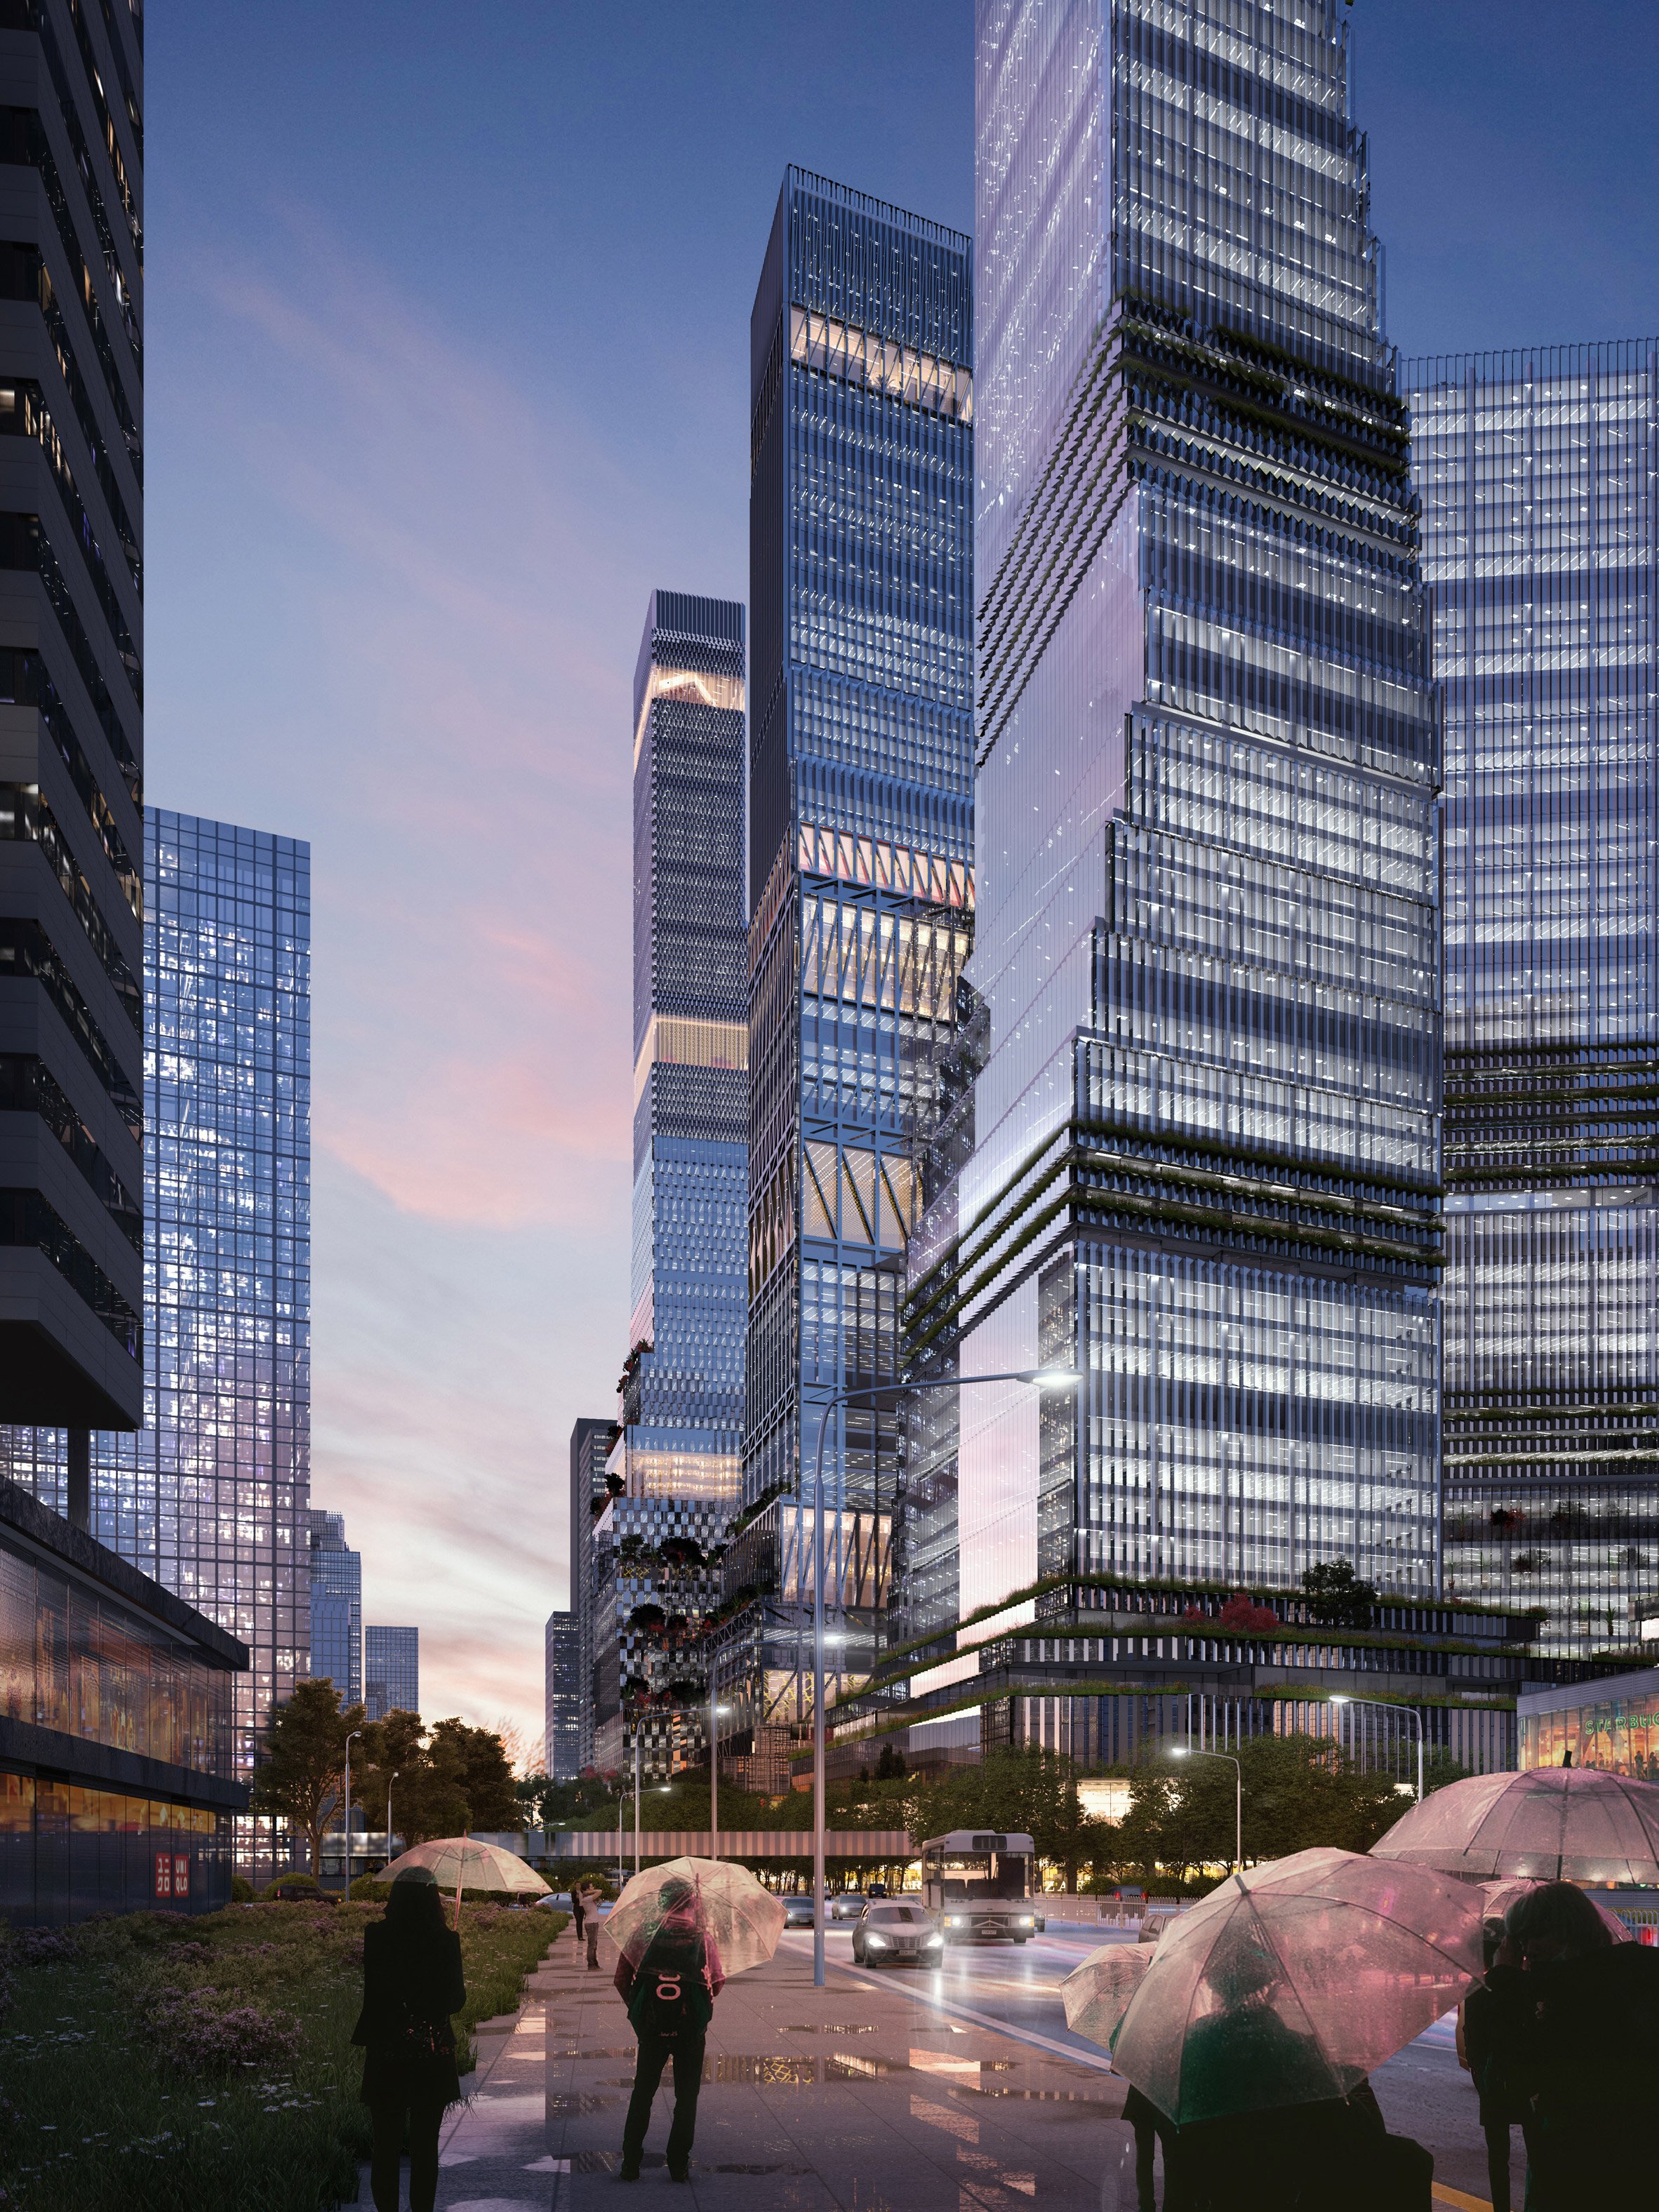 Mecanoo designs 12 skyscrapers for new business district in Shenzhen